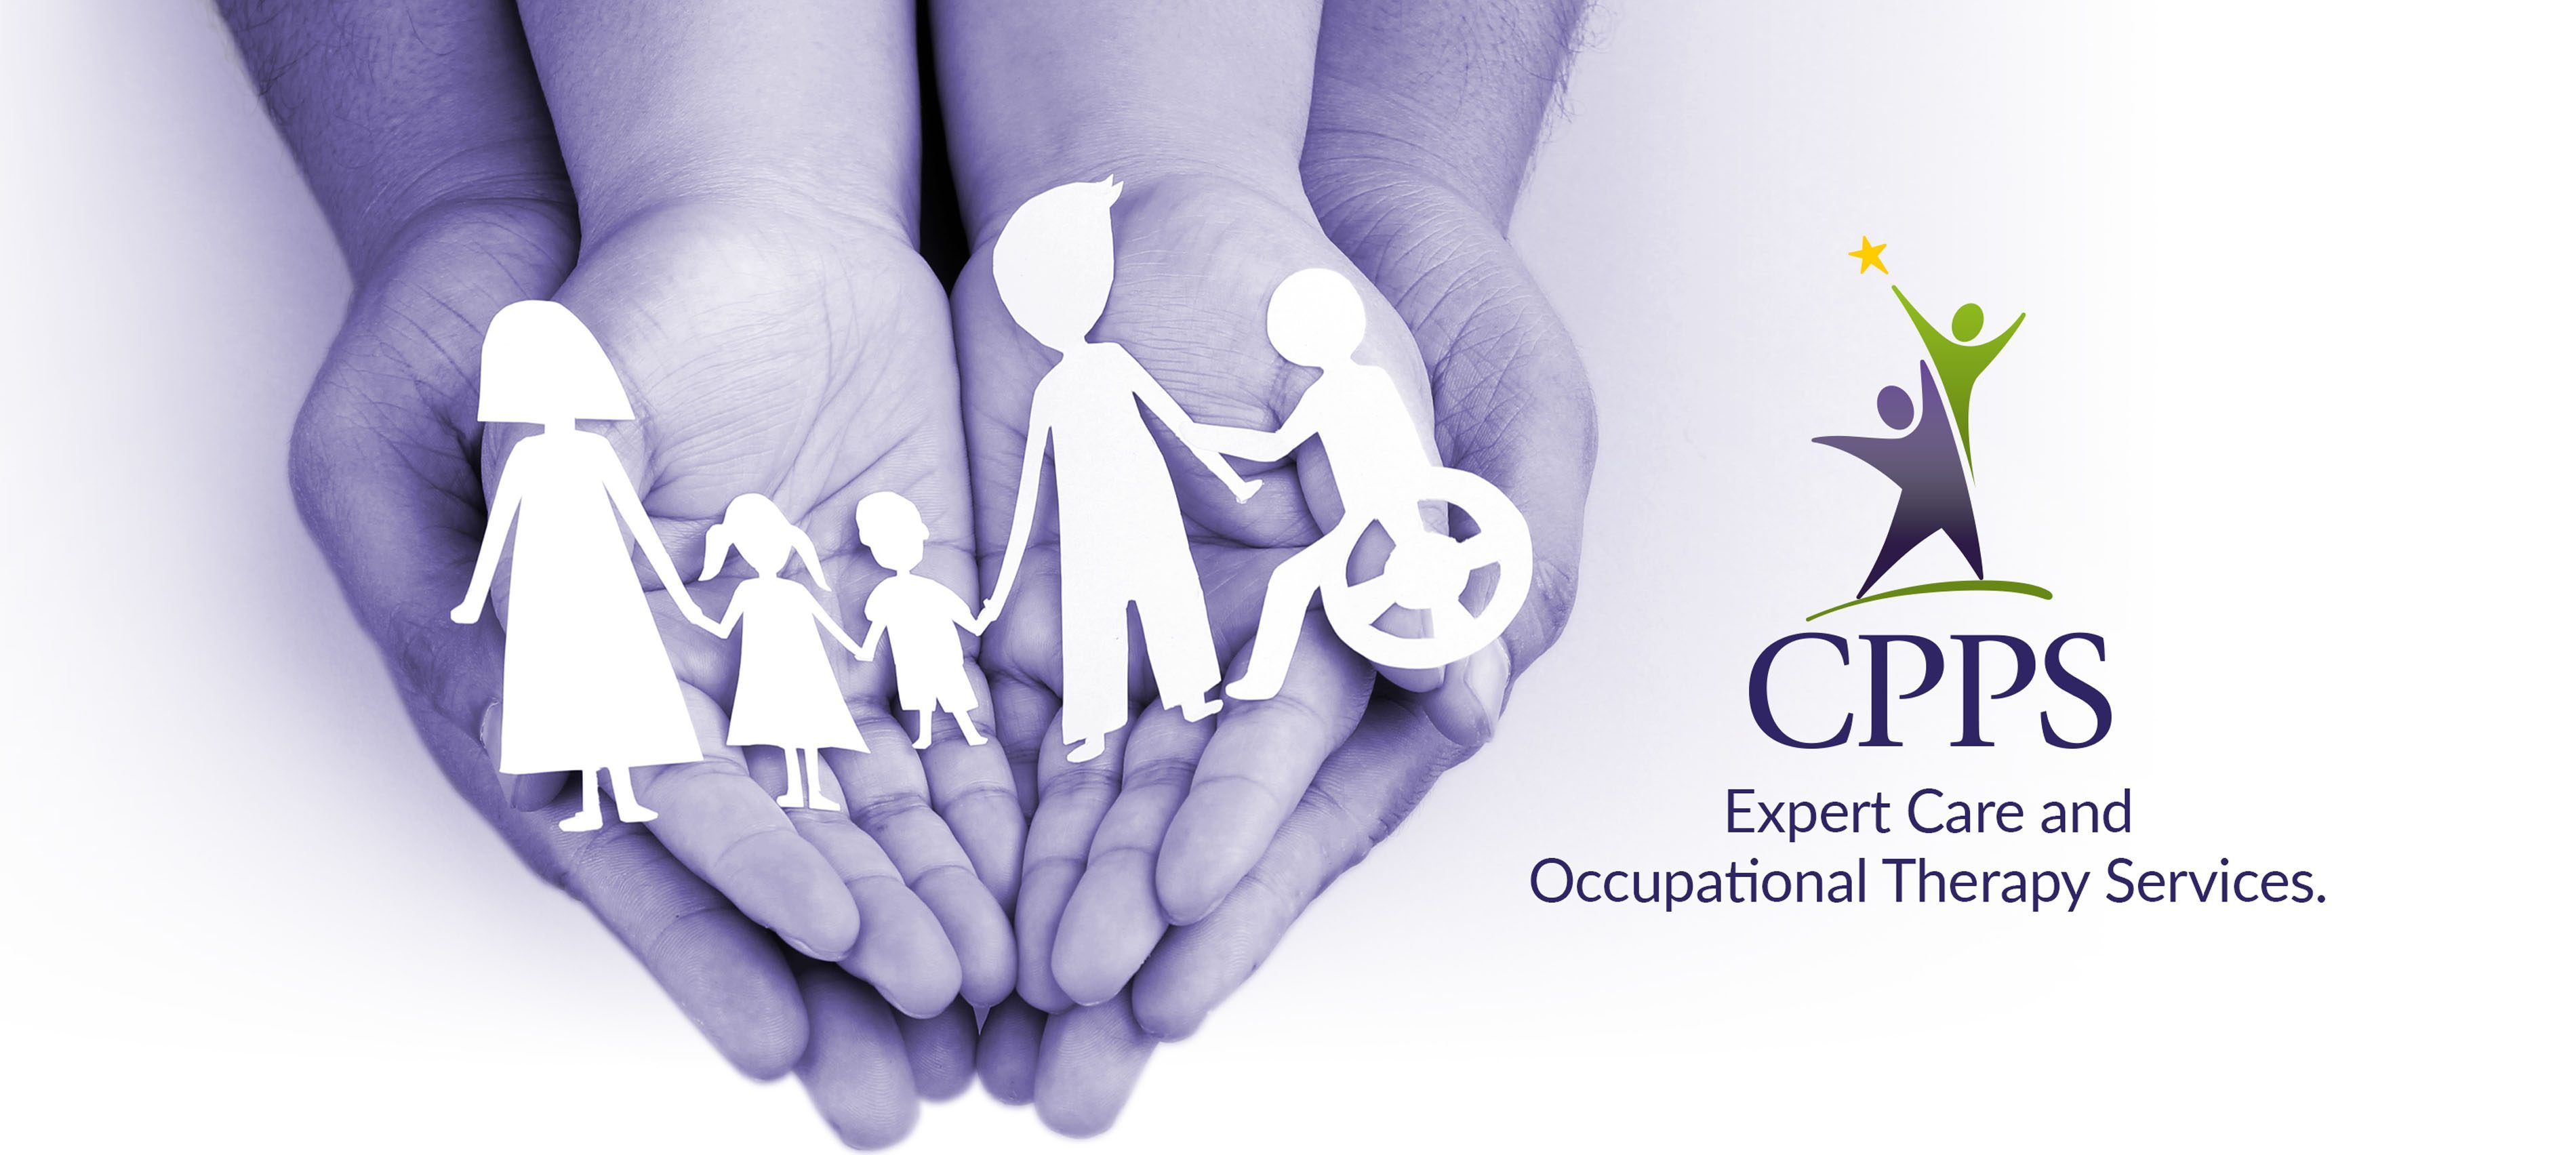 Expert Care and Occupational Therapy Services